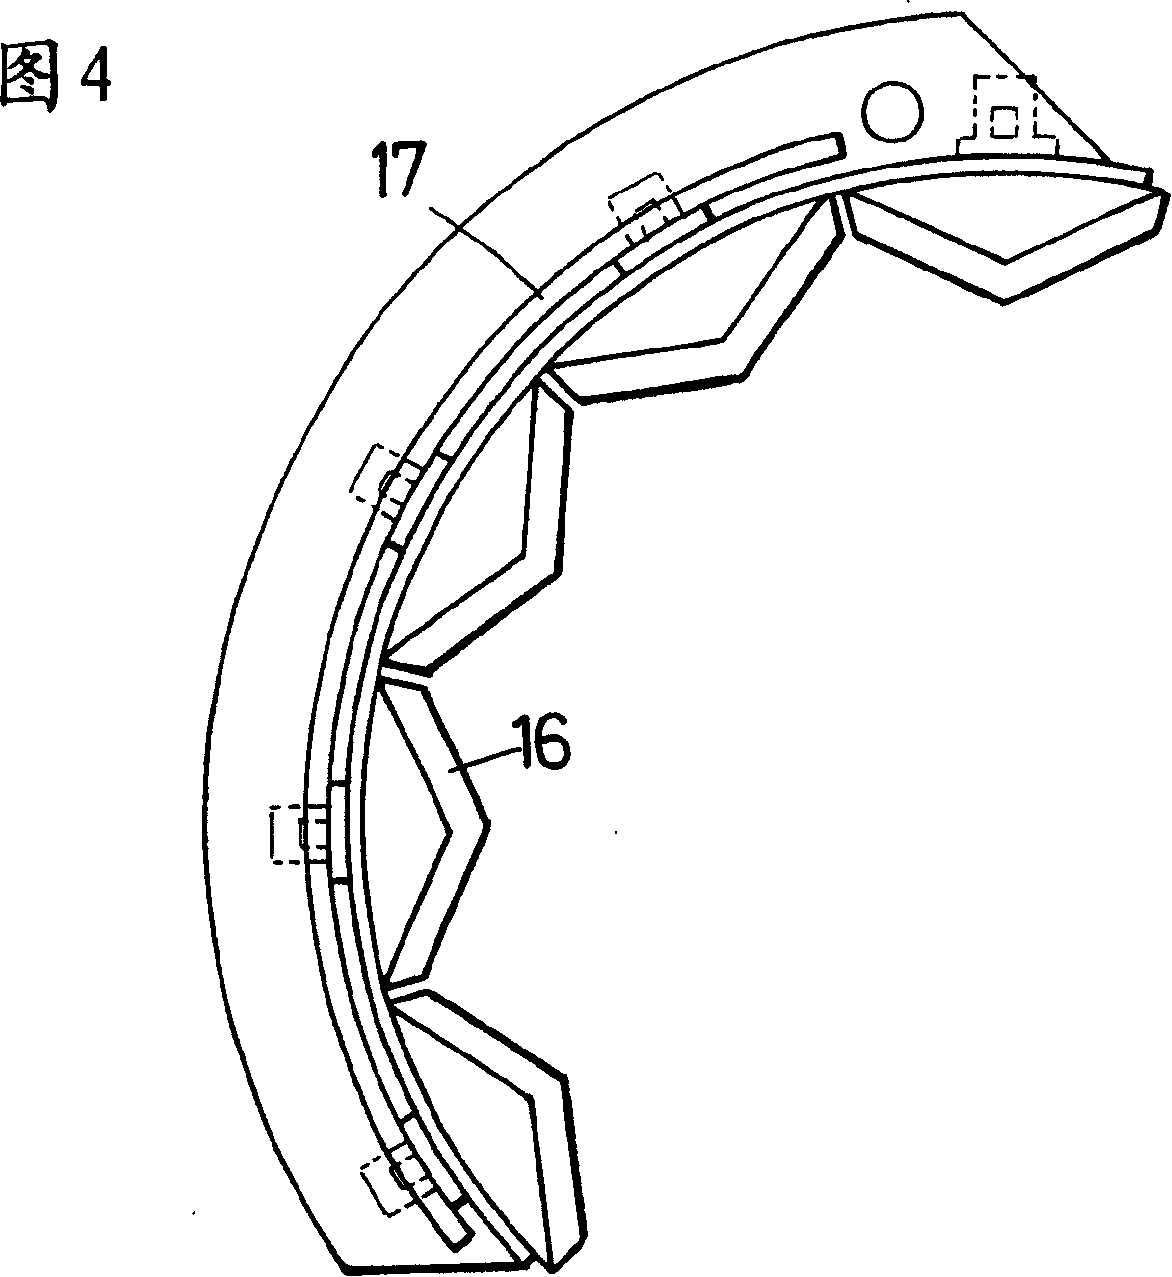 Bucket with crushing lid and its crushing method